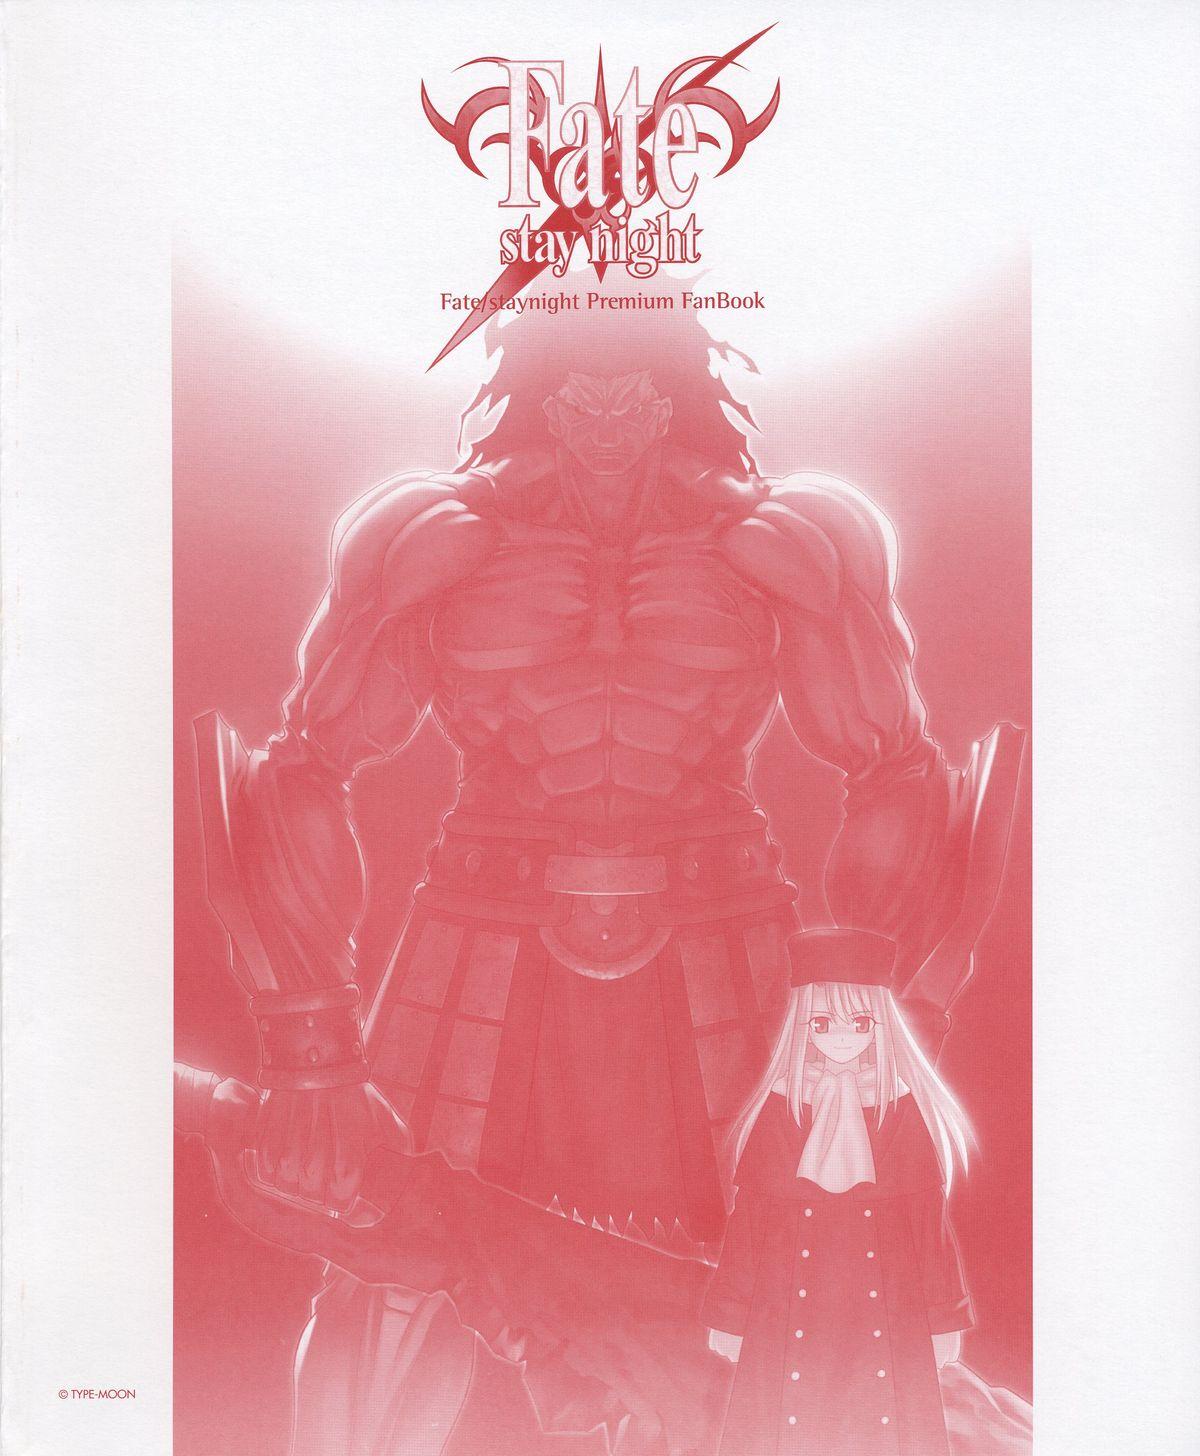 Cuck Fate/stay night Premium FanBook - Fate stay night Village - Page 96